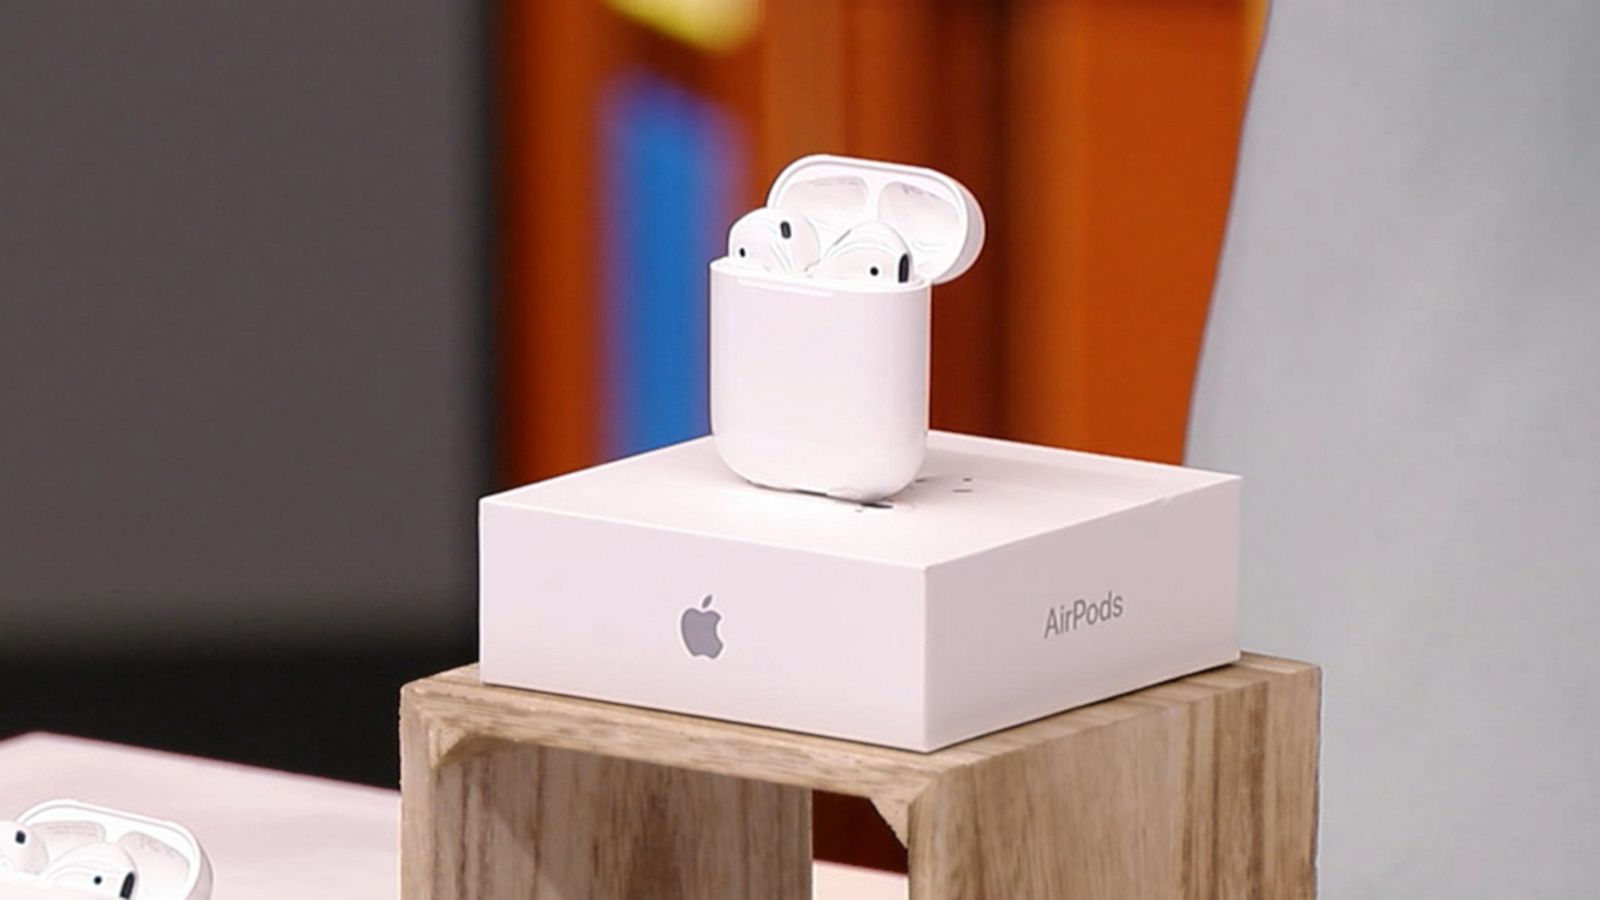 https://s.abcnews.com/images/Lifestyle/230712_abcnl_update_12Pm_bergamatto_airpods_hpMain_16x9_1600.jpg